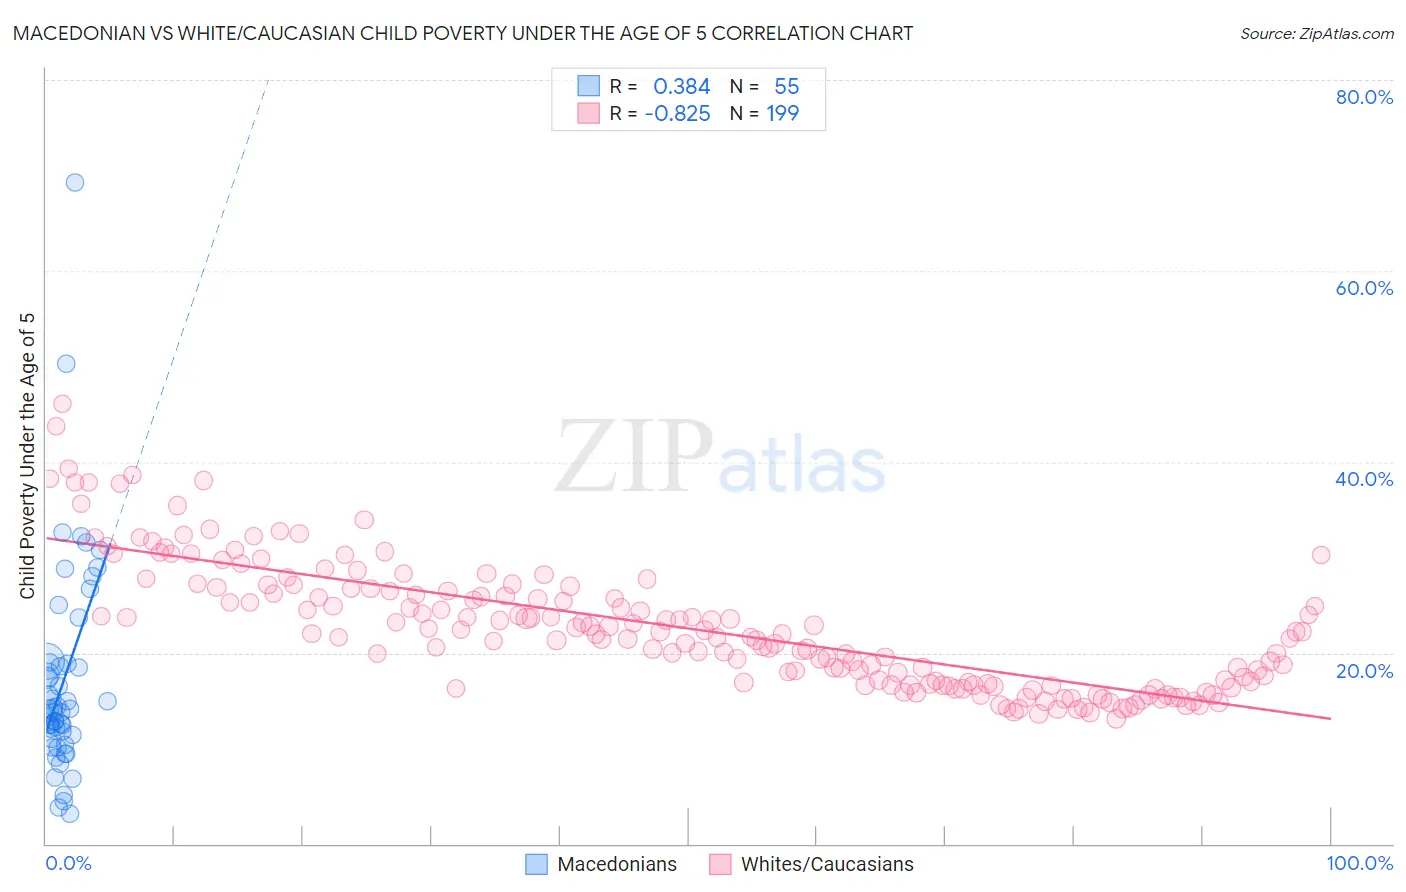 Macedonian vs White/Caucasian Child Poverty Under the Age of 5